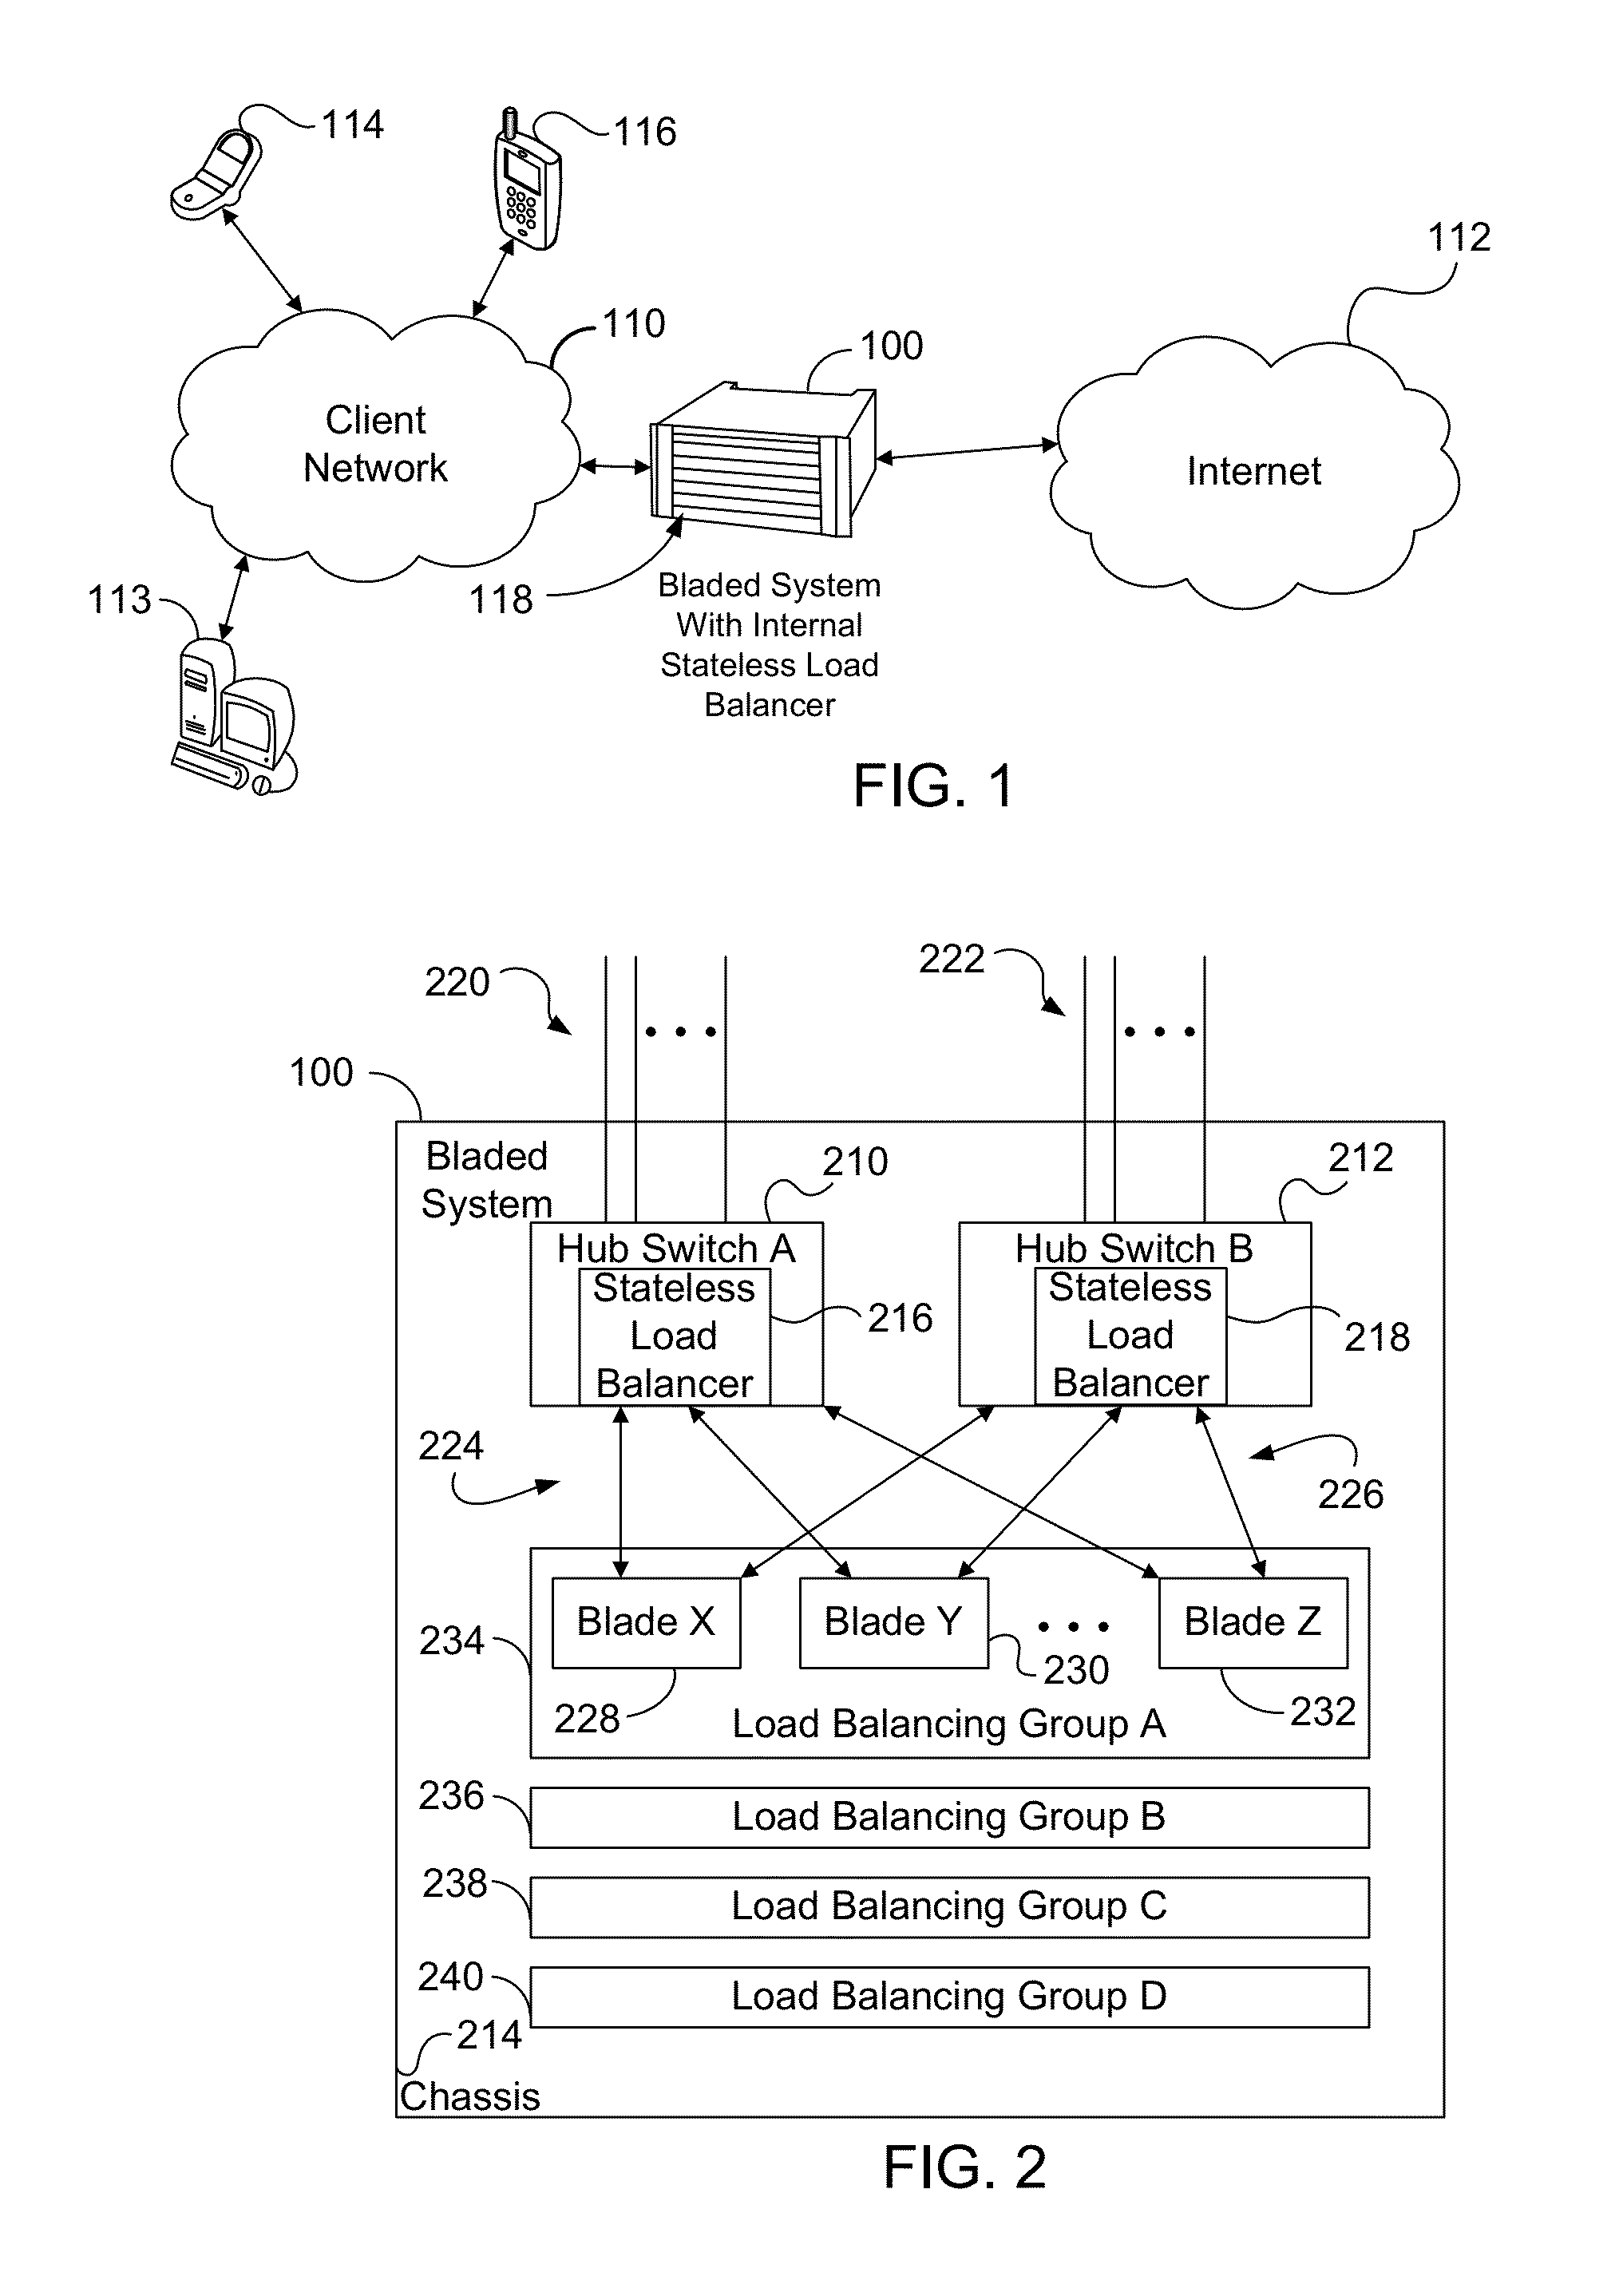 Stateless load balancer in a multi-node system for transparent processing with packet preservation